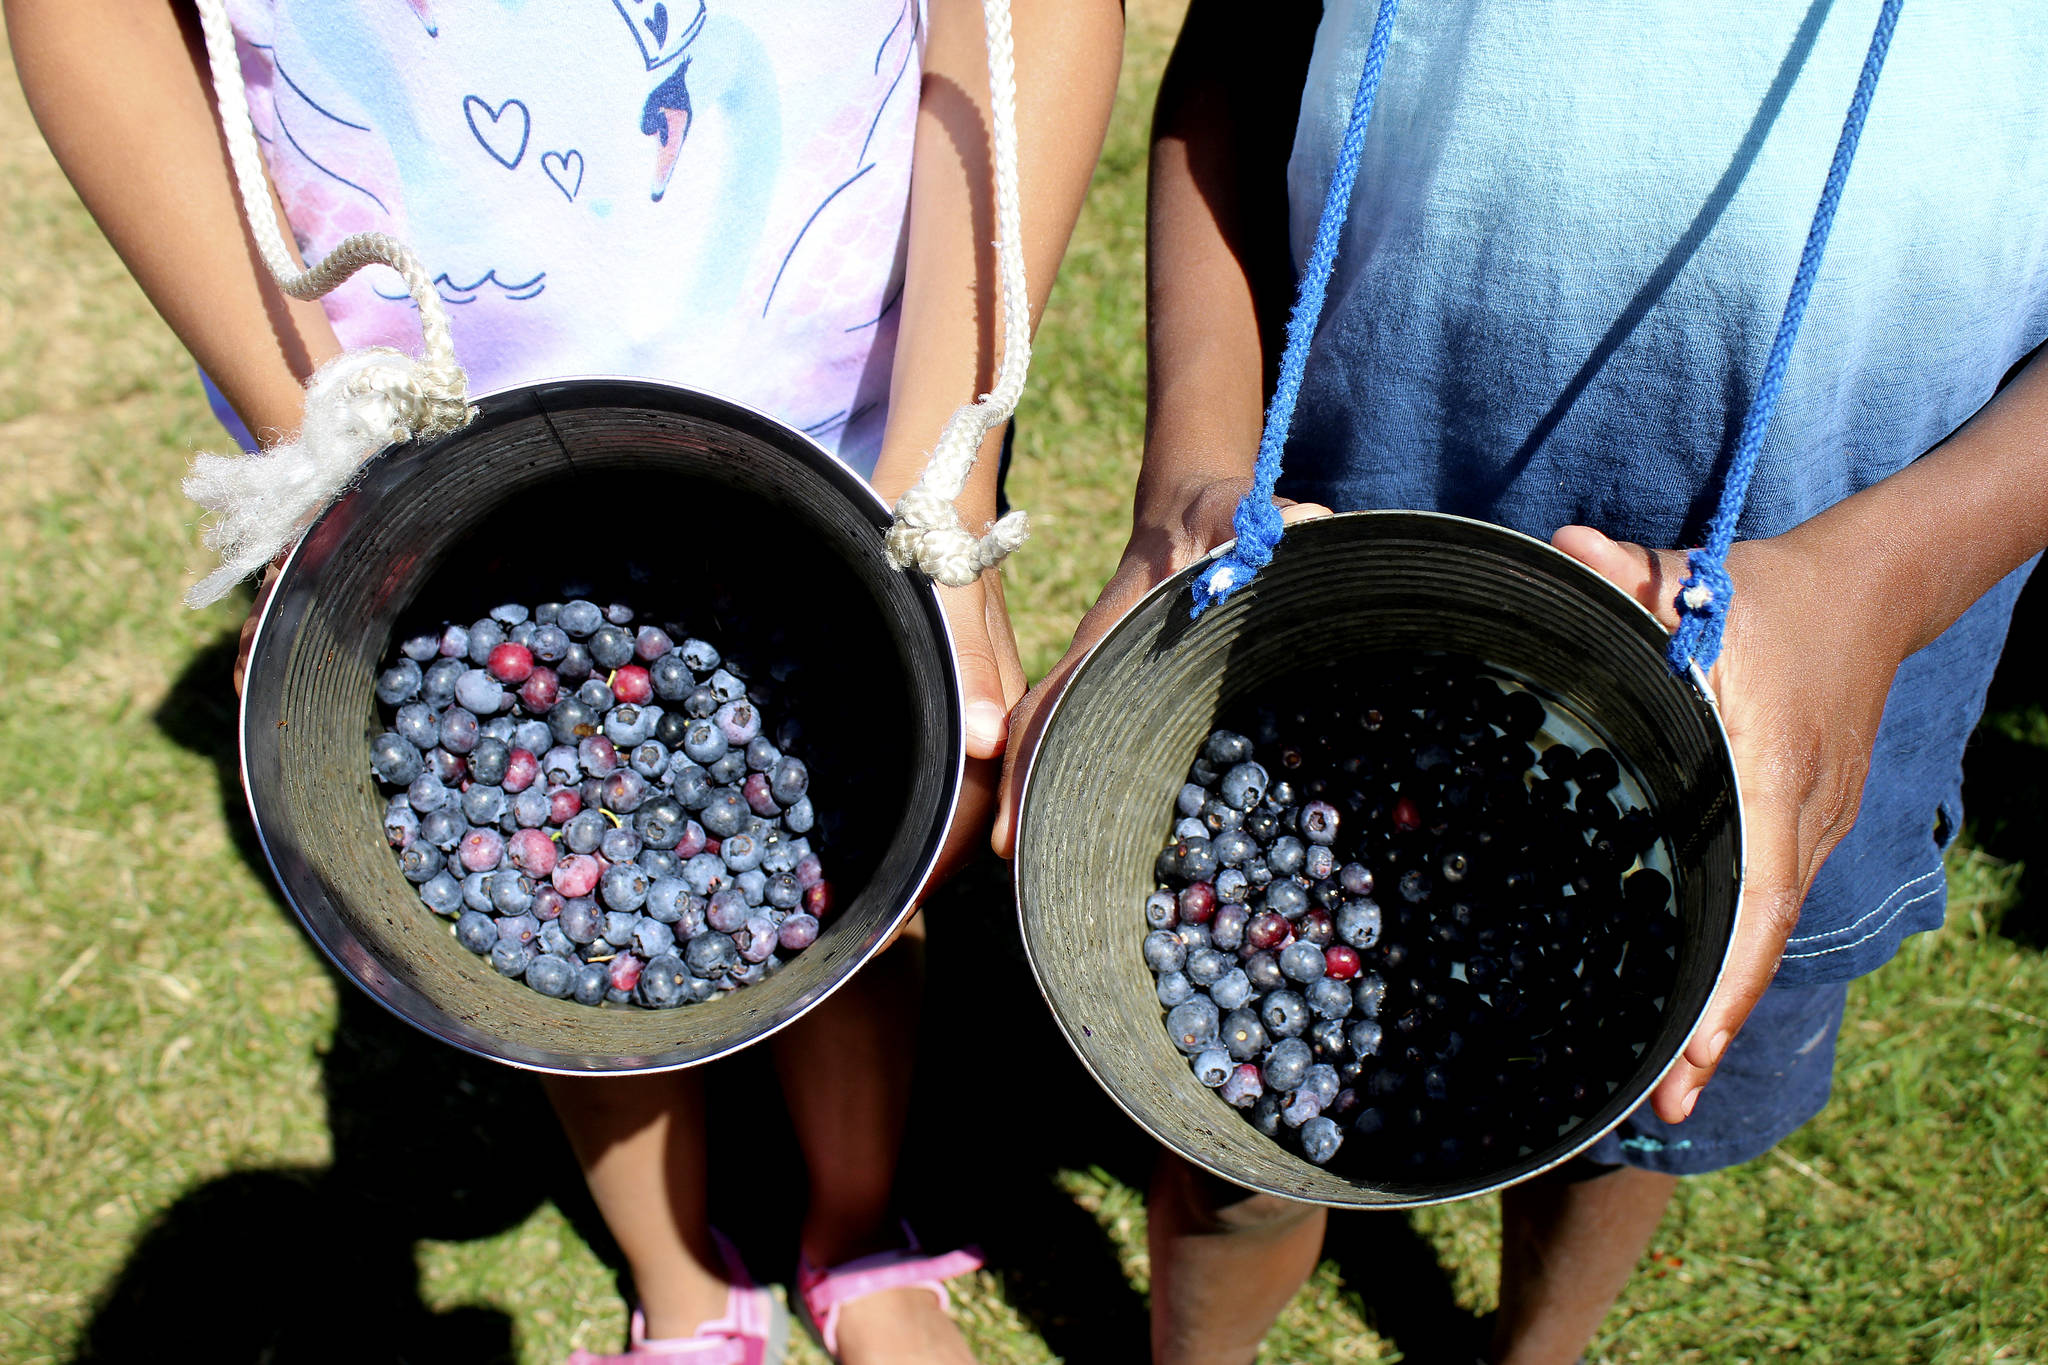 Siblings 9-year-old Ava Guerrier, left, and 8-year-old August Guerrier show off their blueberry findings on Aug. 13, 2019. Olivia Sullivan/staff photo